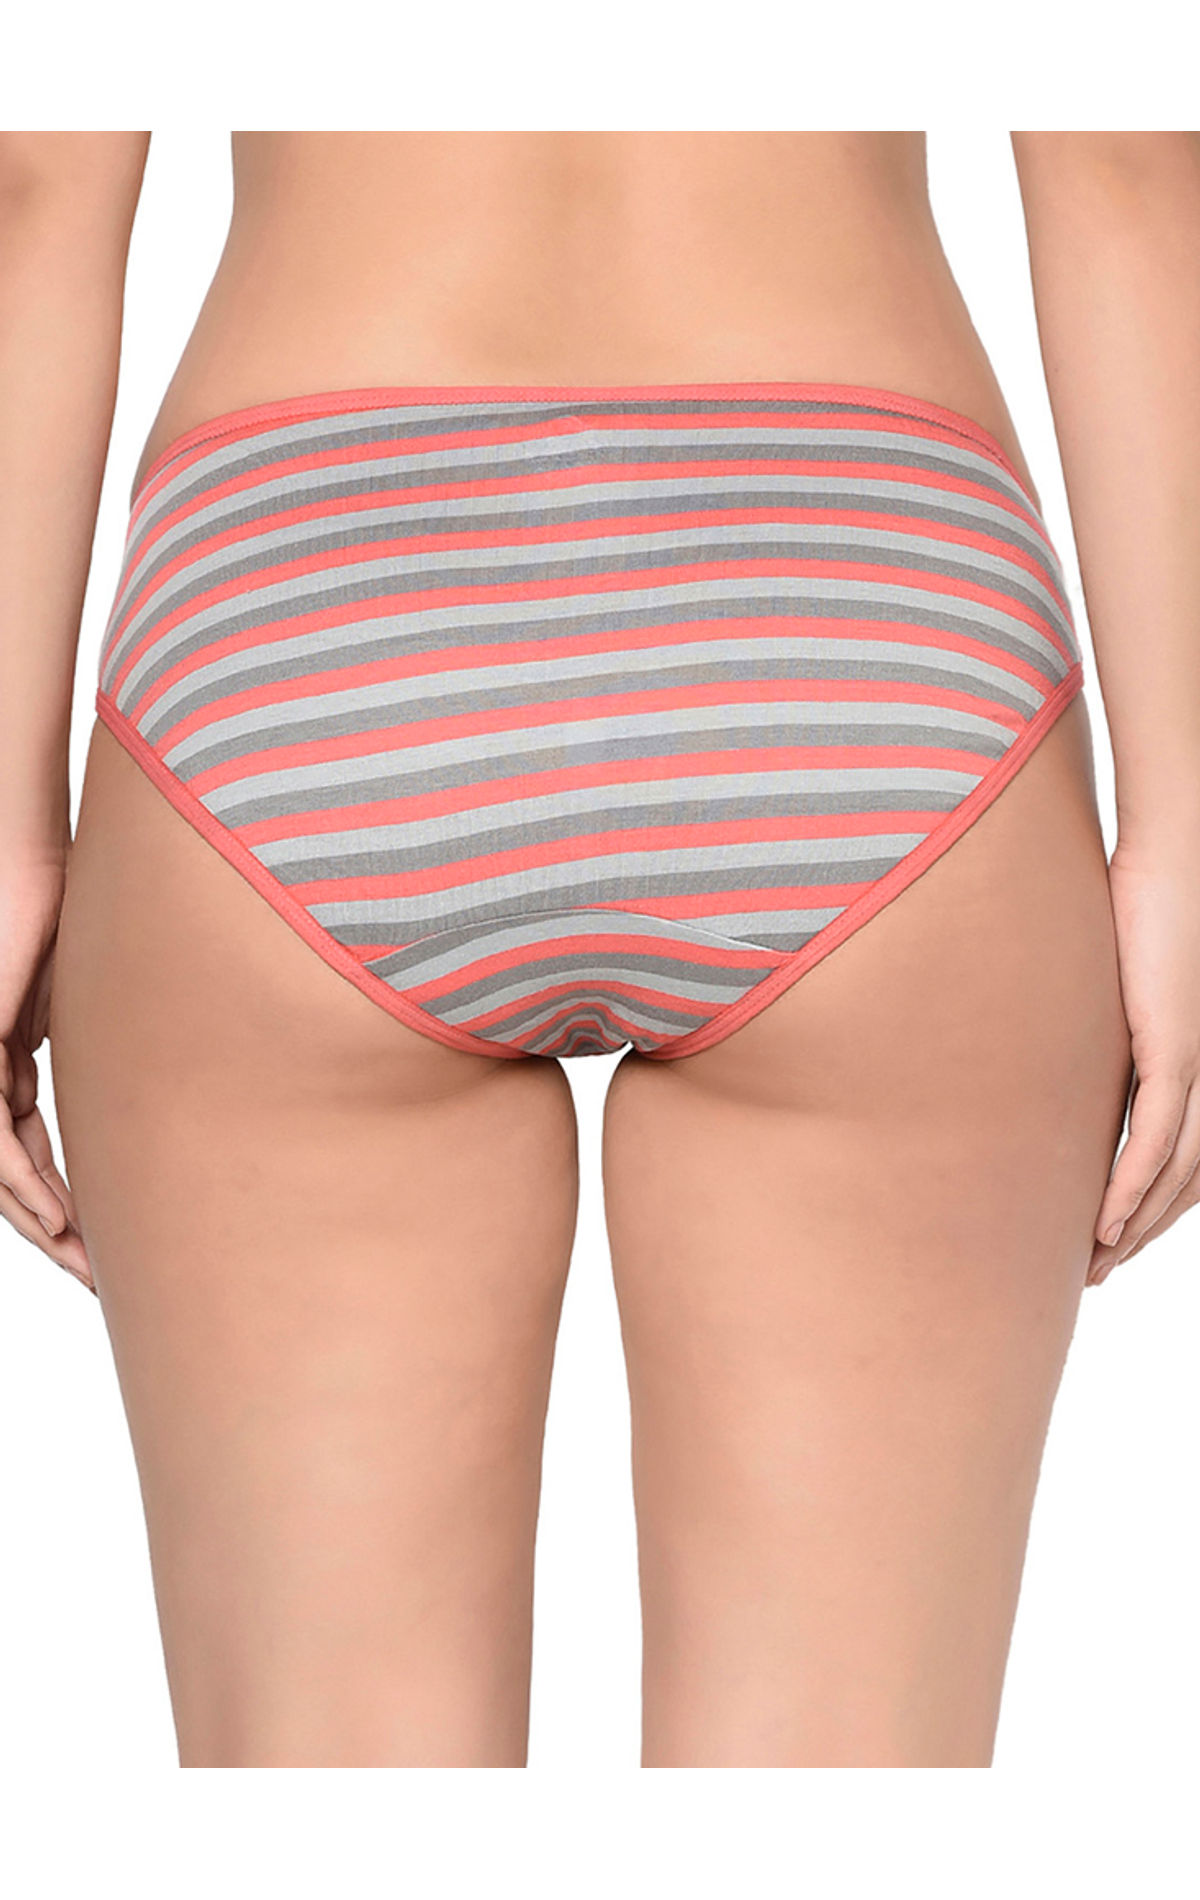 Bodycare Pack Of 3 Stripes Hipster Panty In Assorted Print-9460